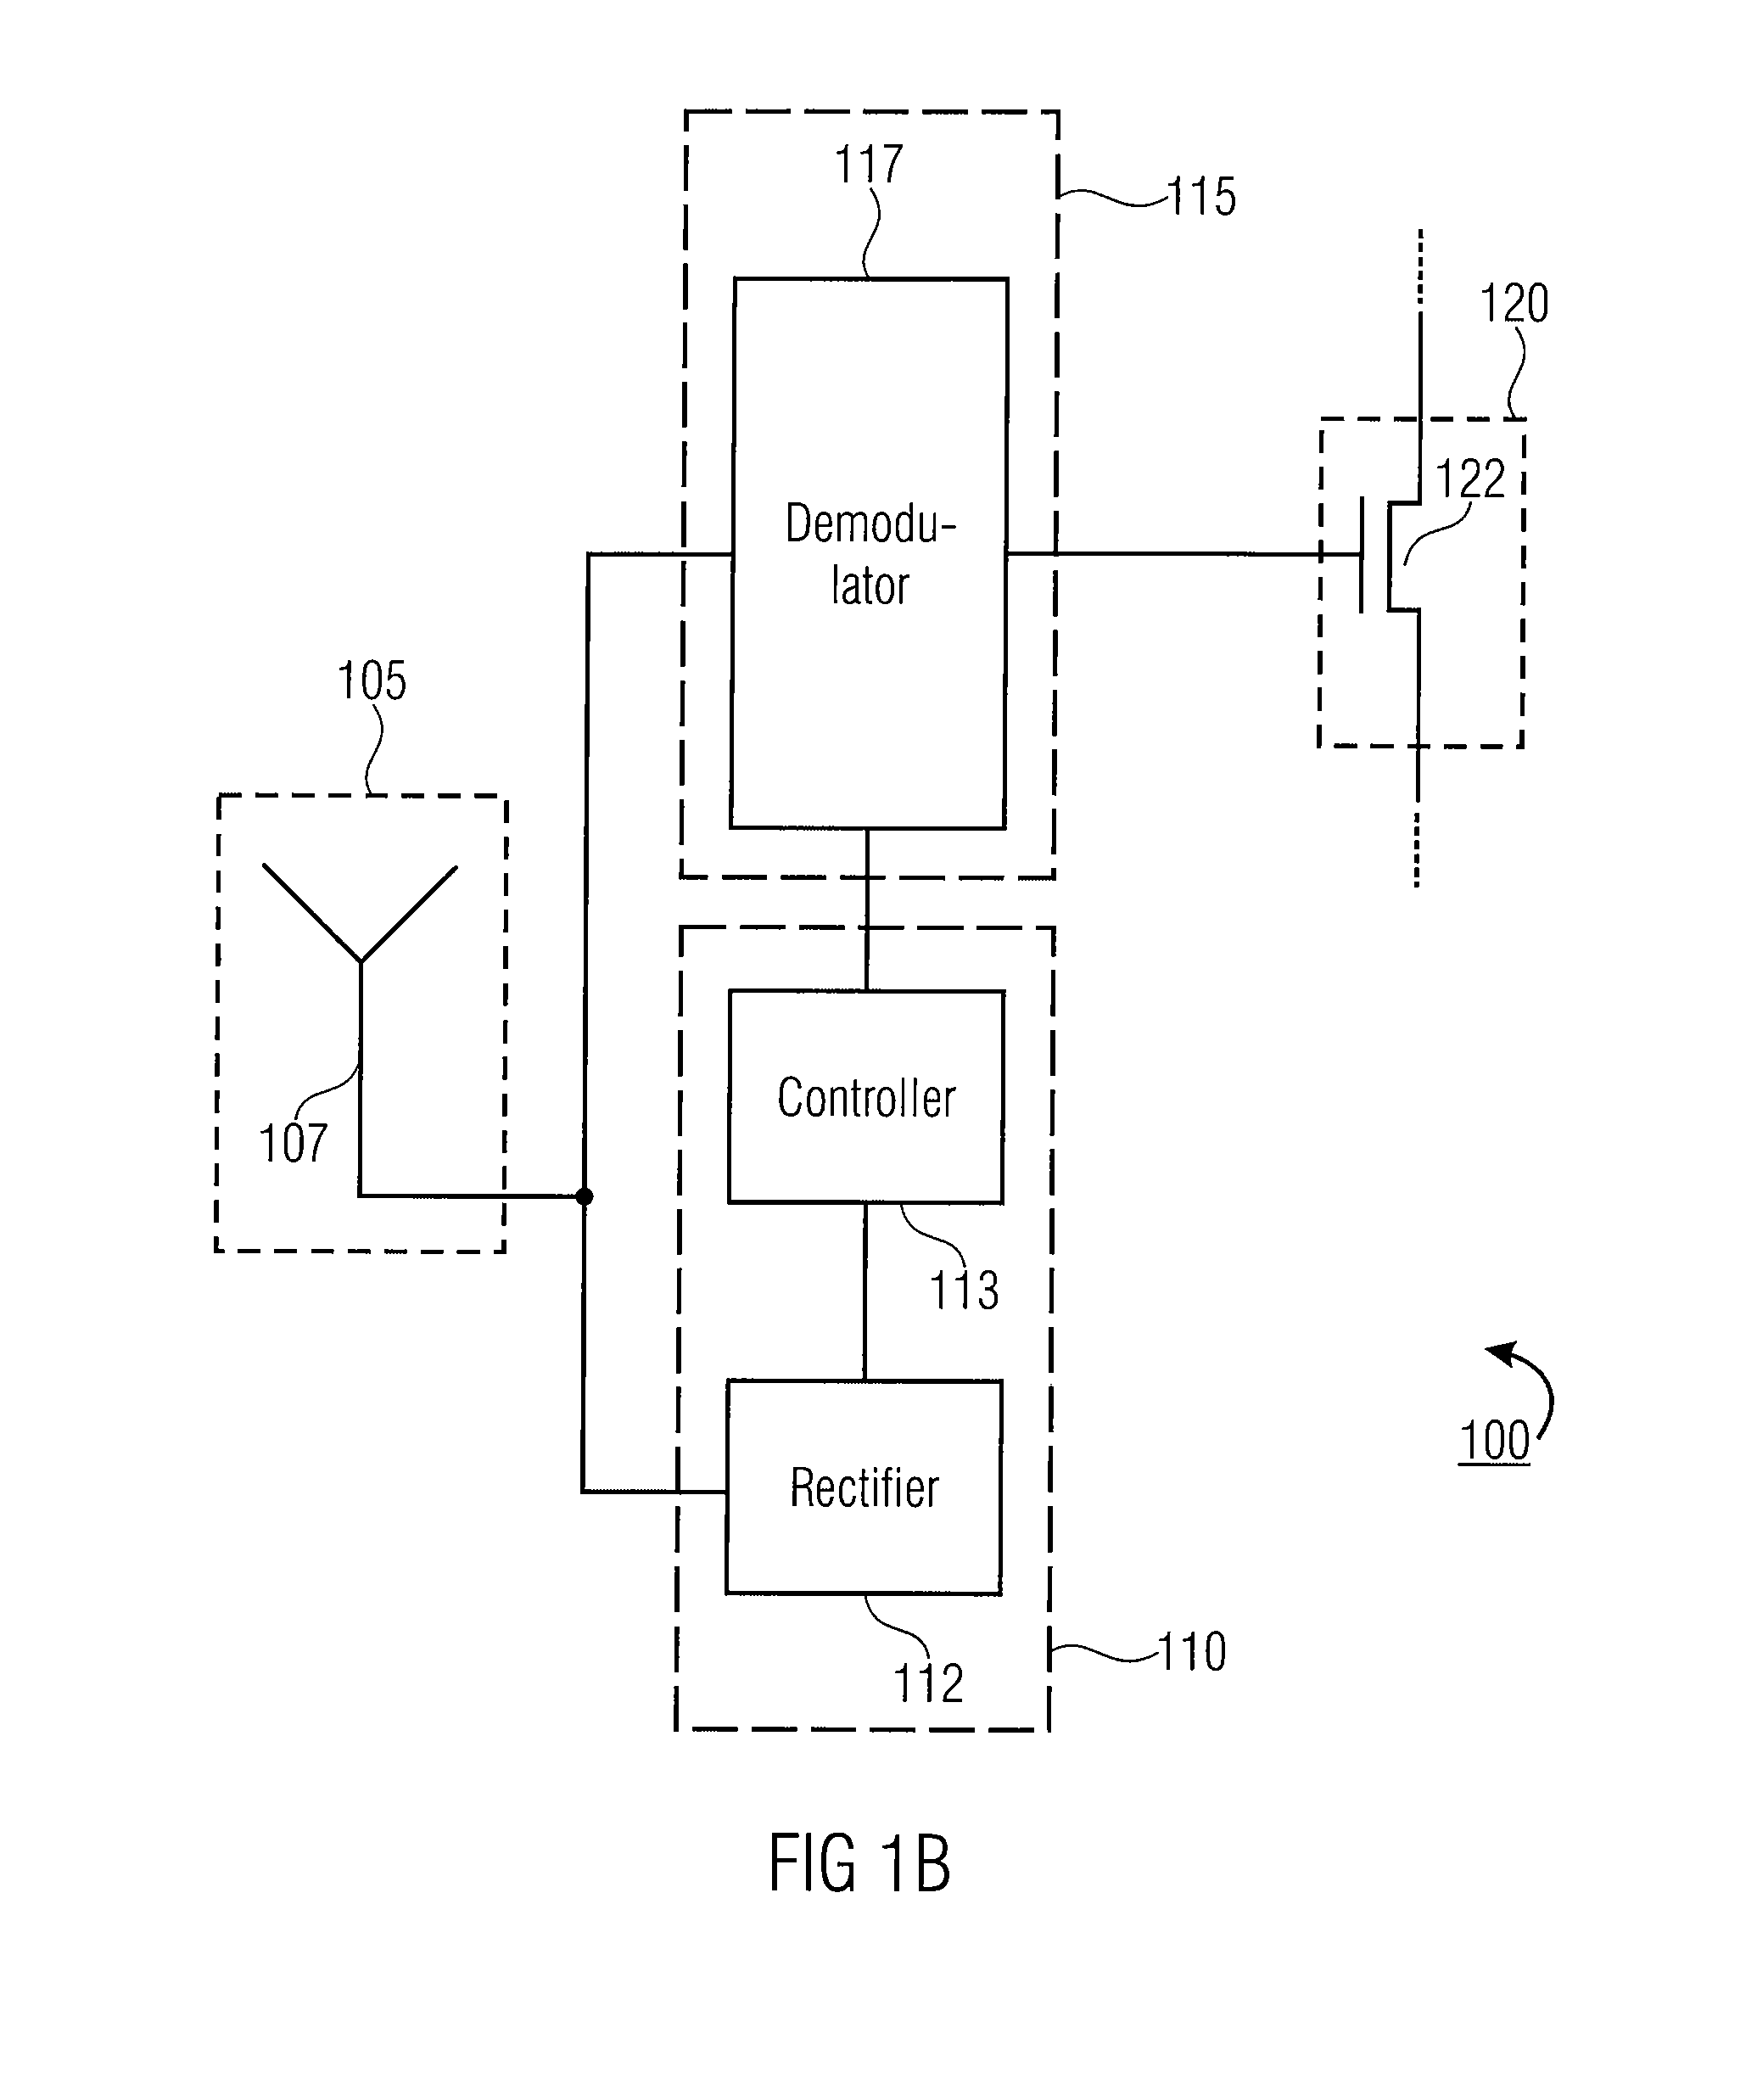 Apparatus for waking up a device